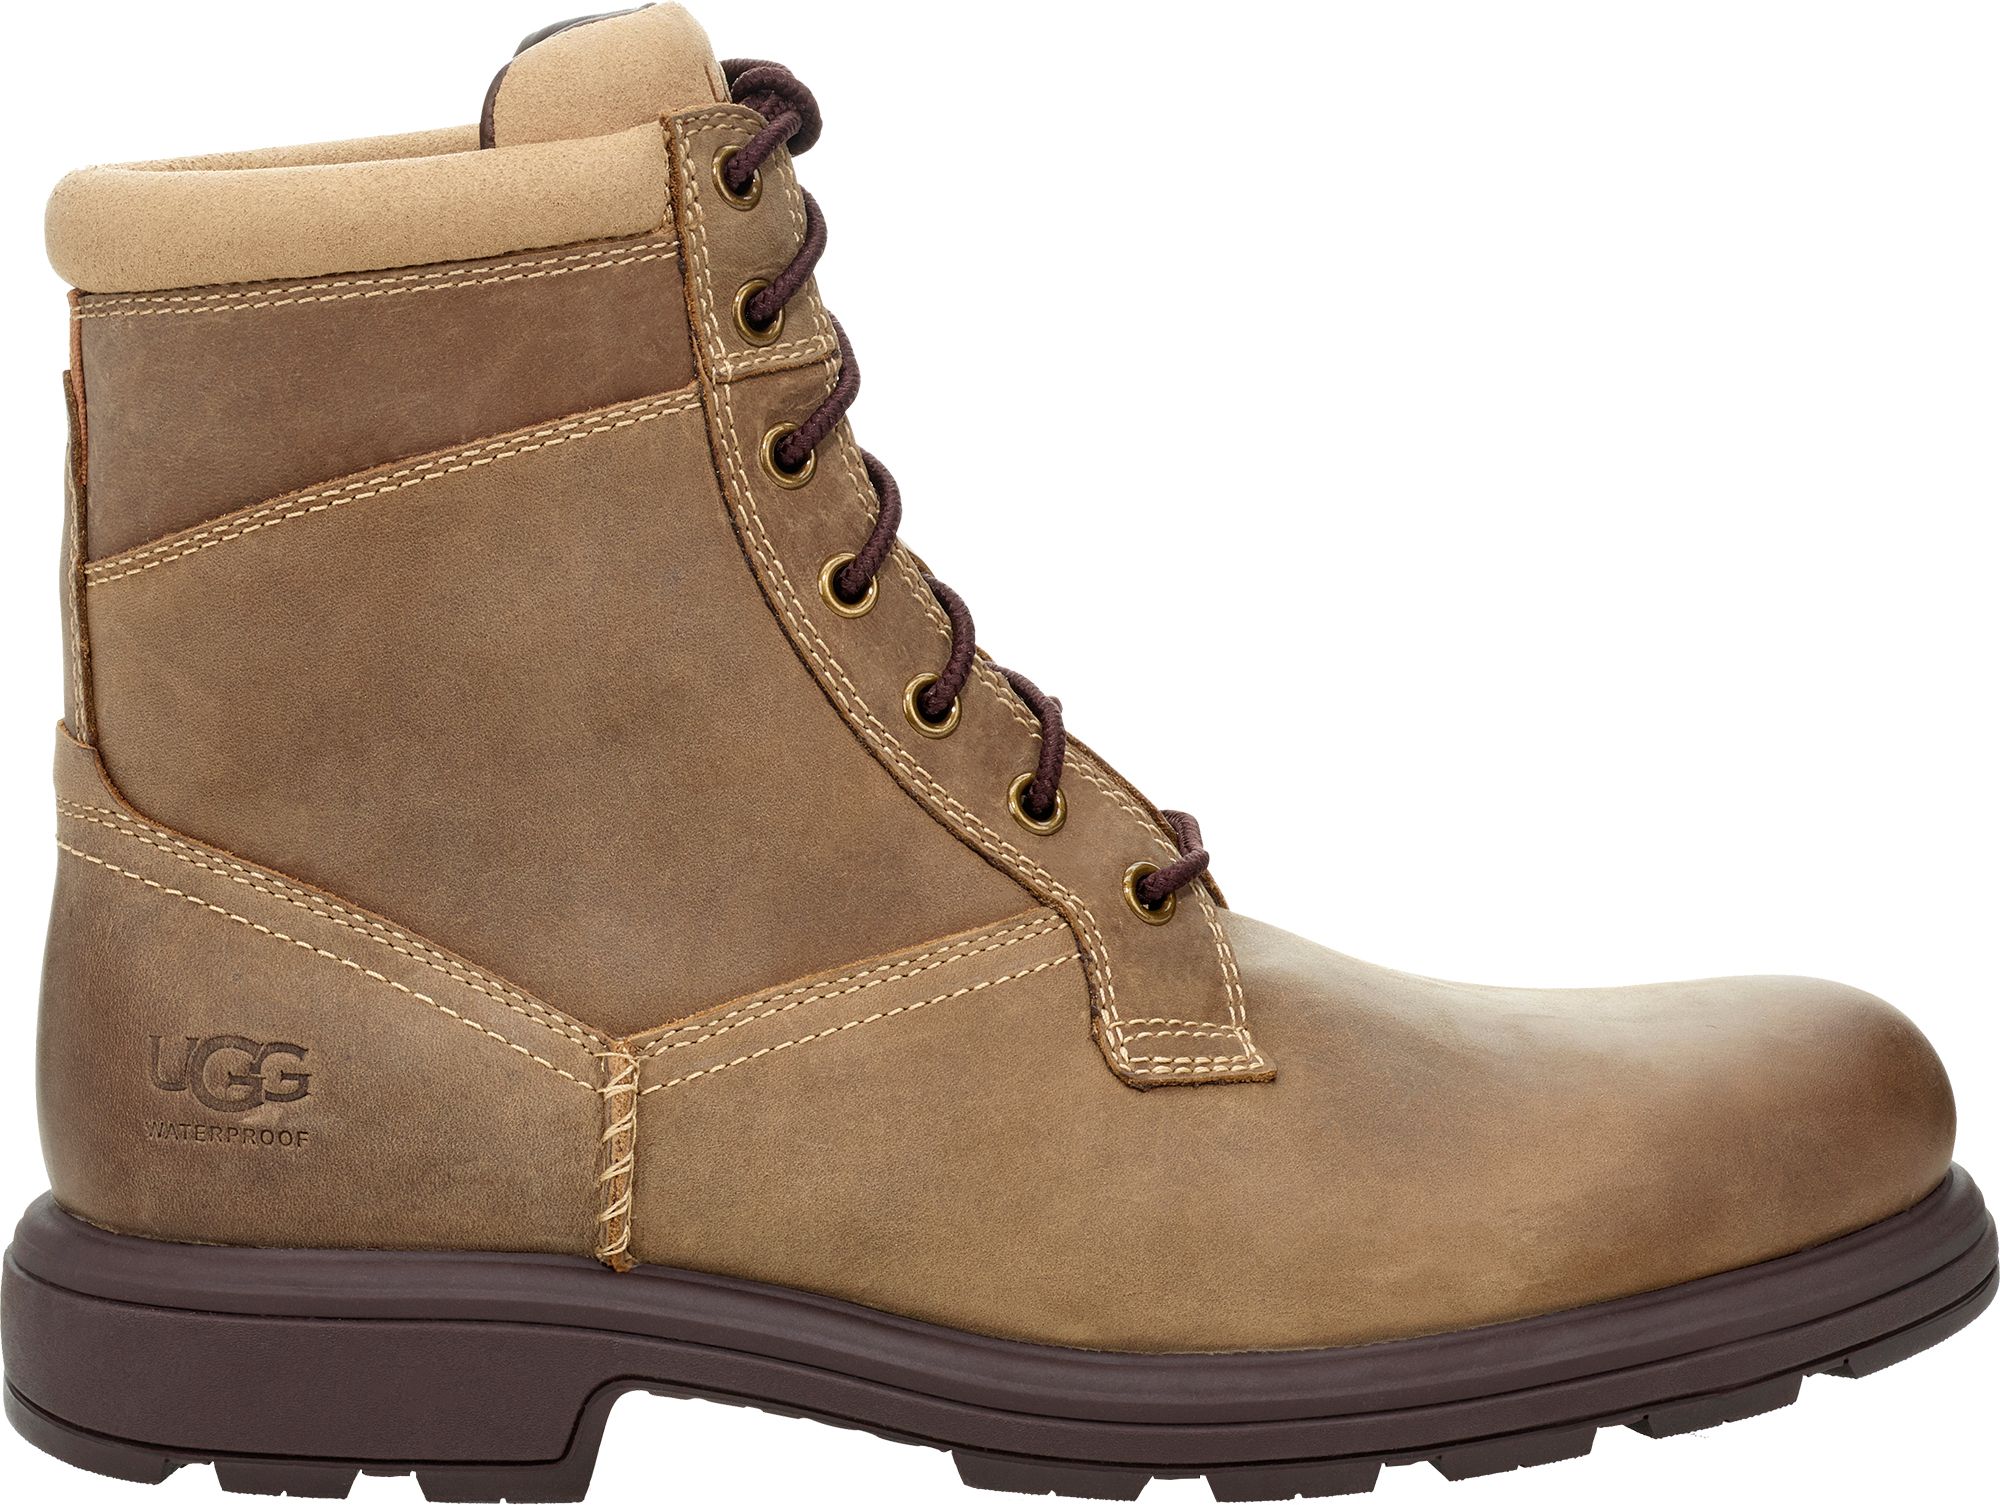 mens ugg winter boots sale